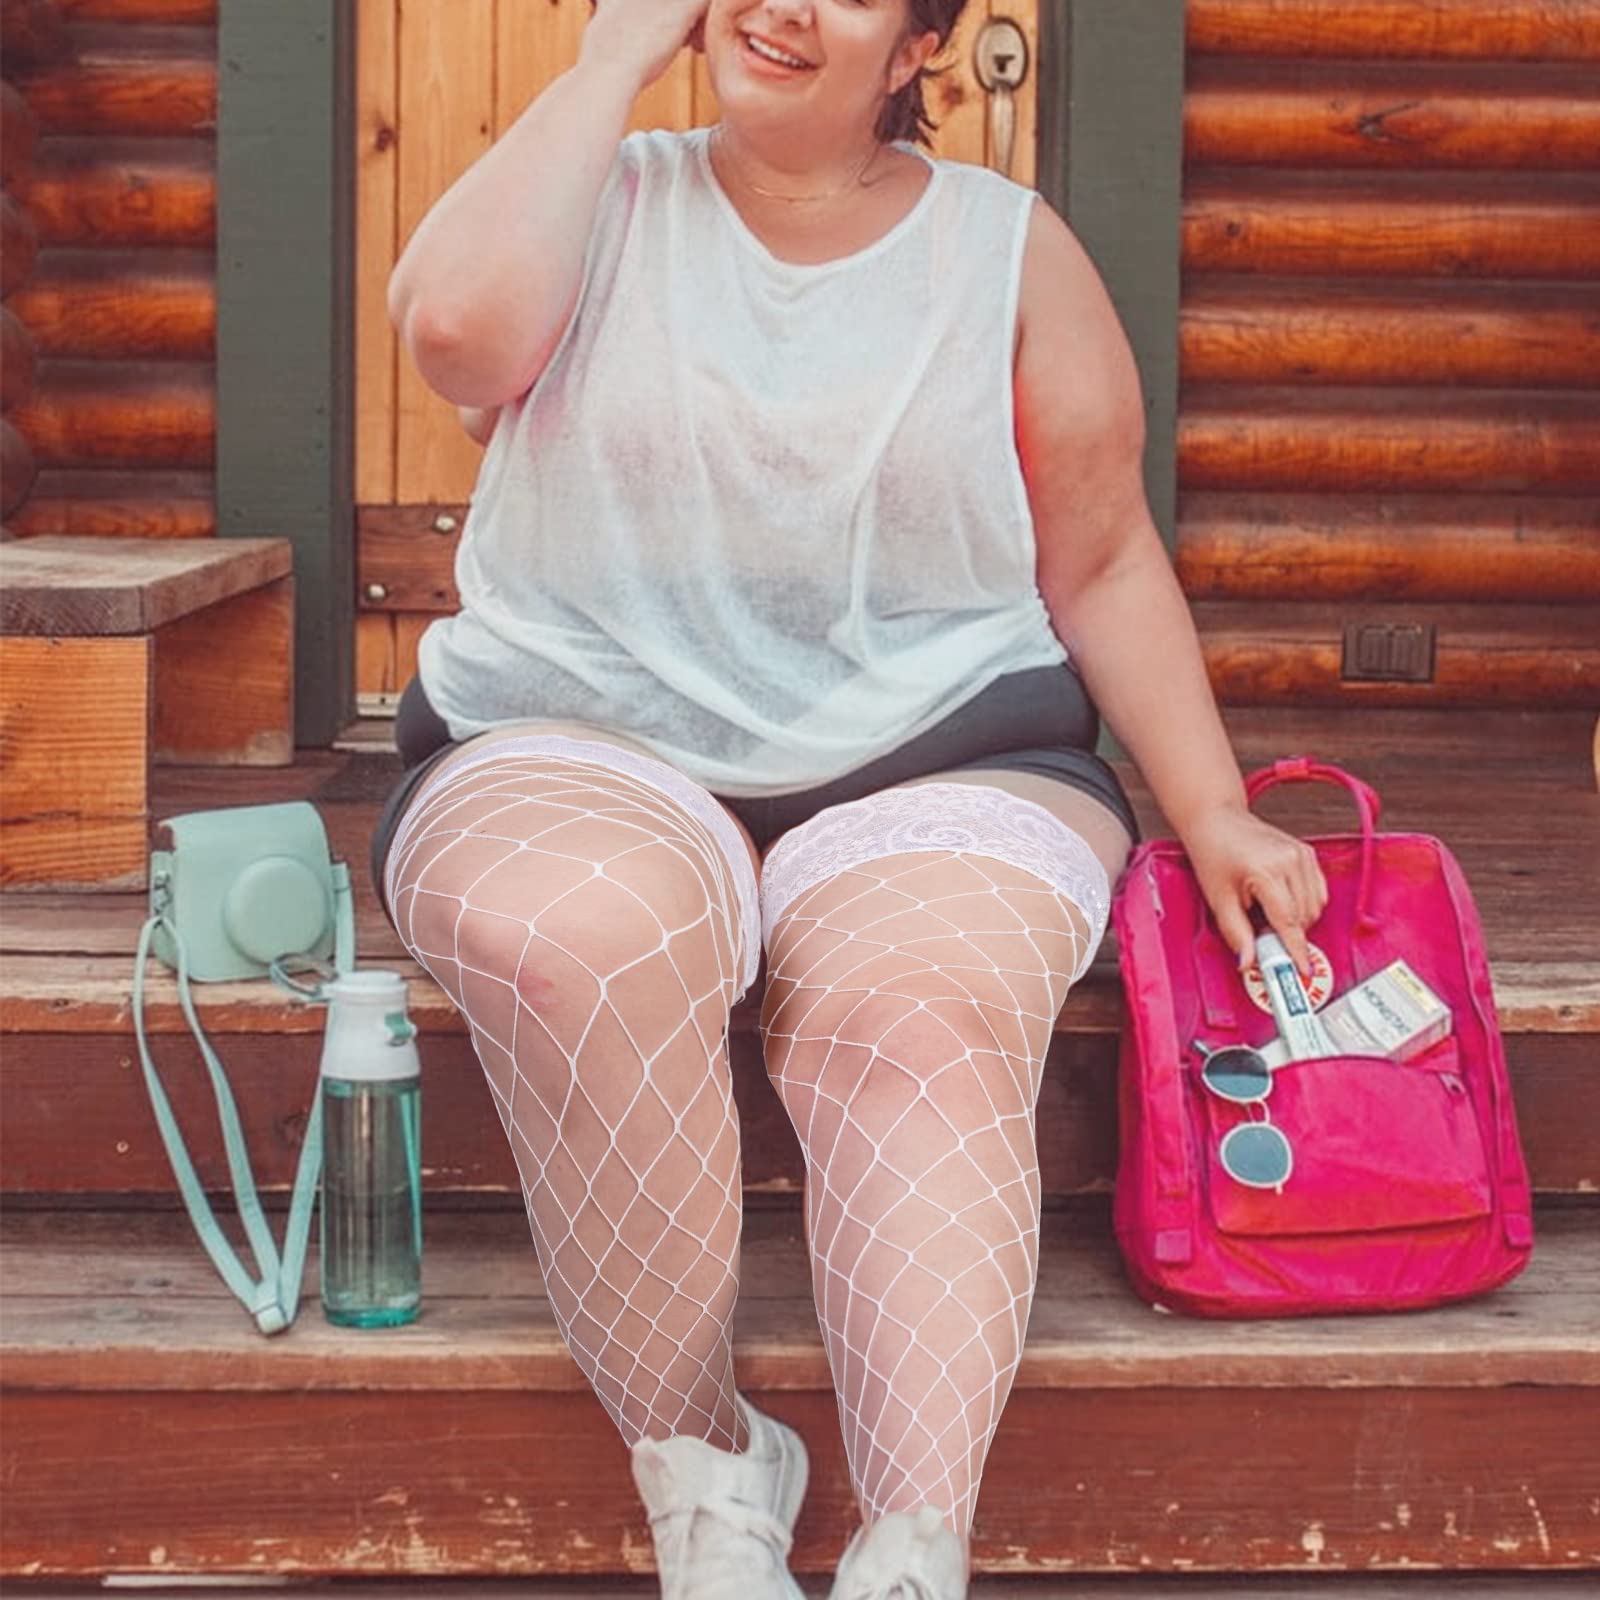 Plus Size Thigh High Socks for Summer: Lightweight and Breathable Options - Moon Wood